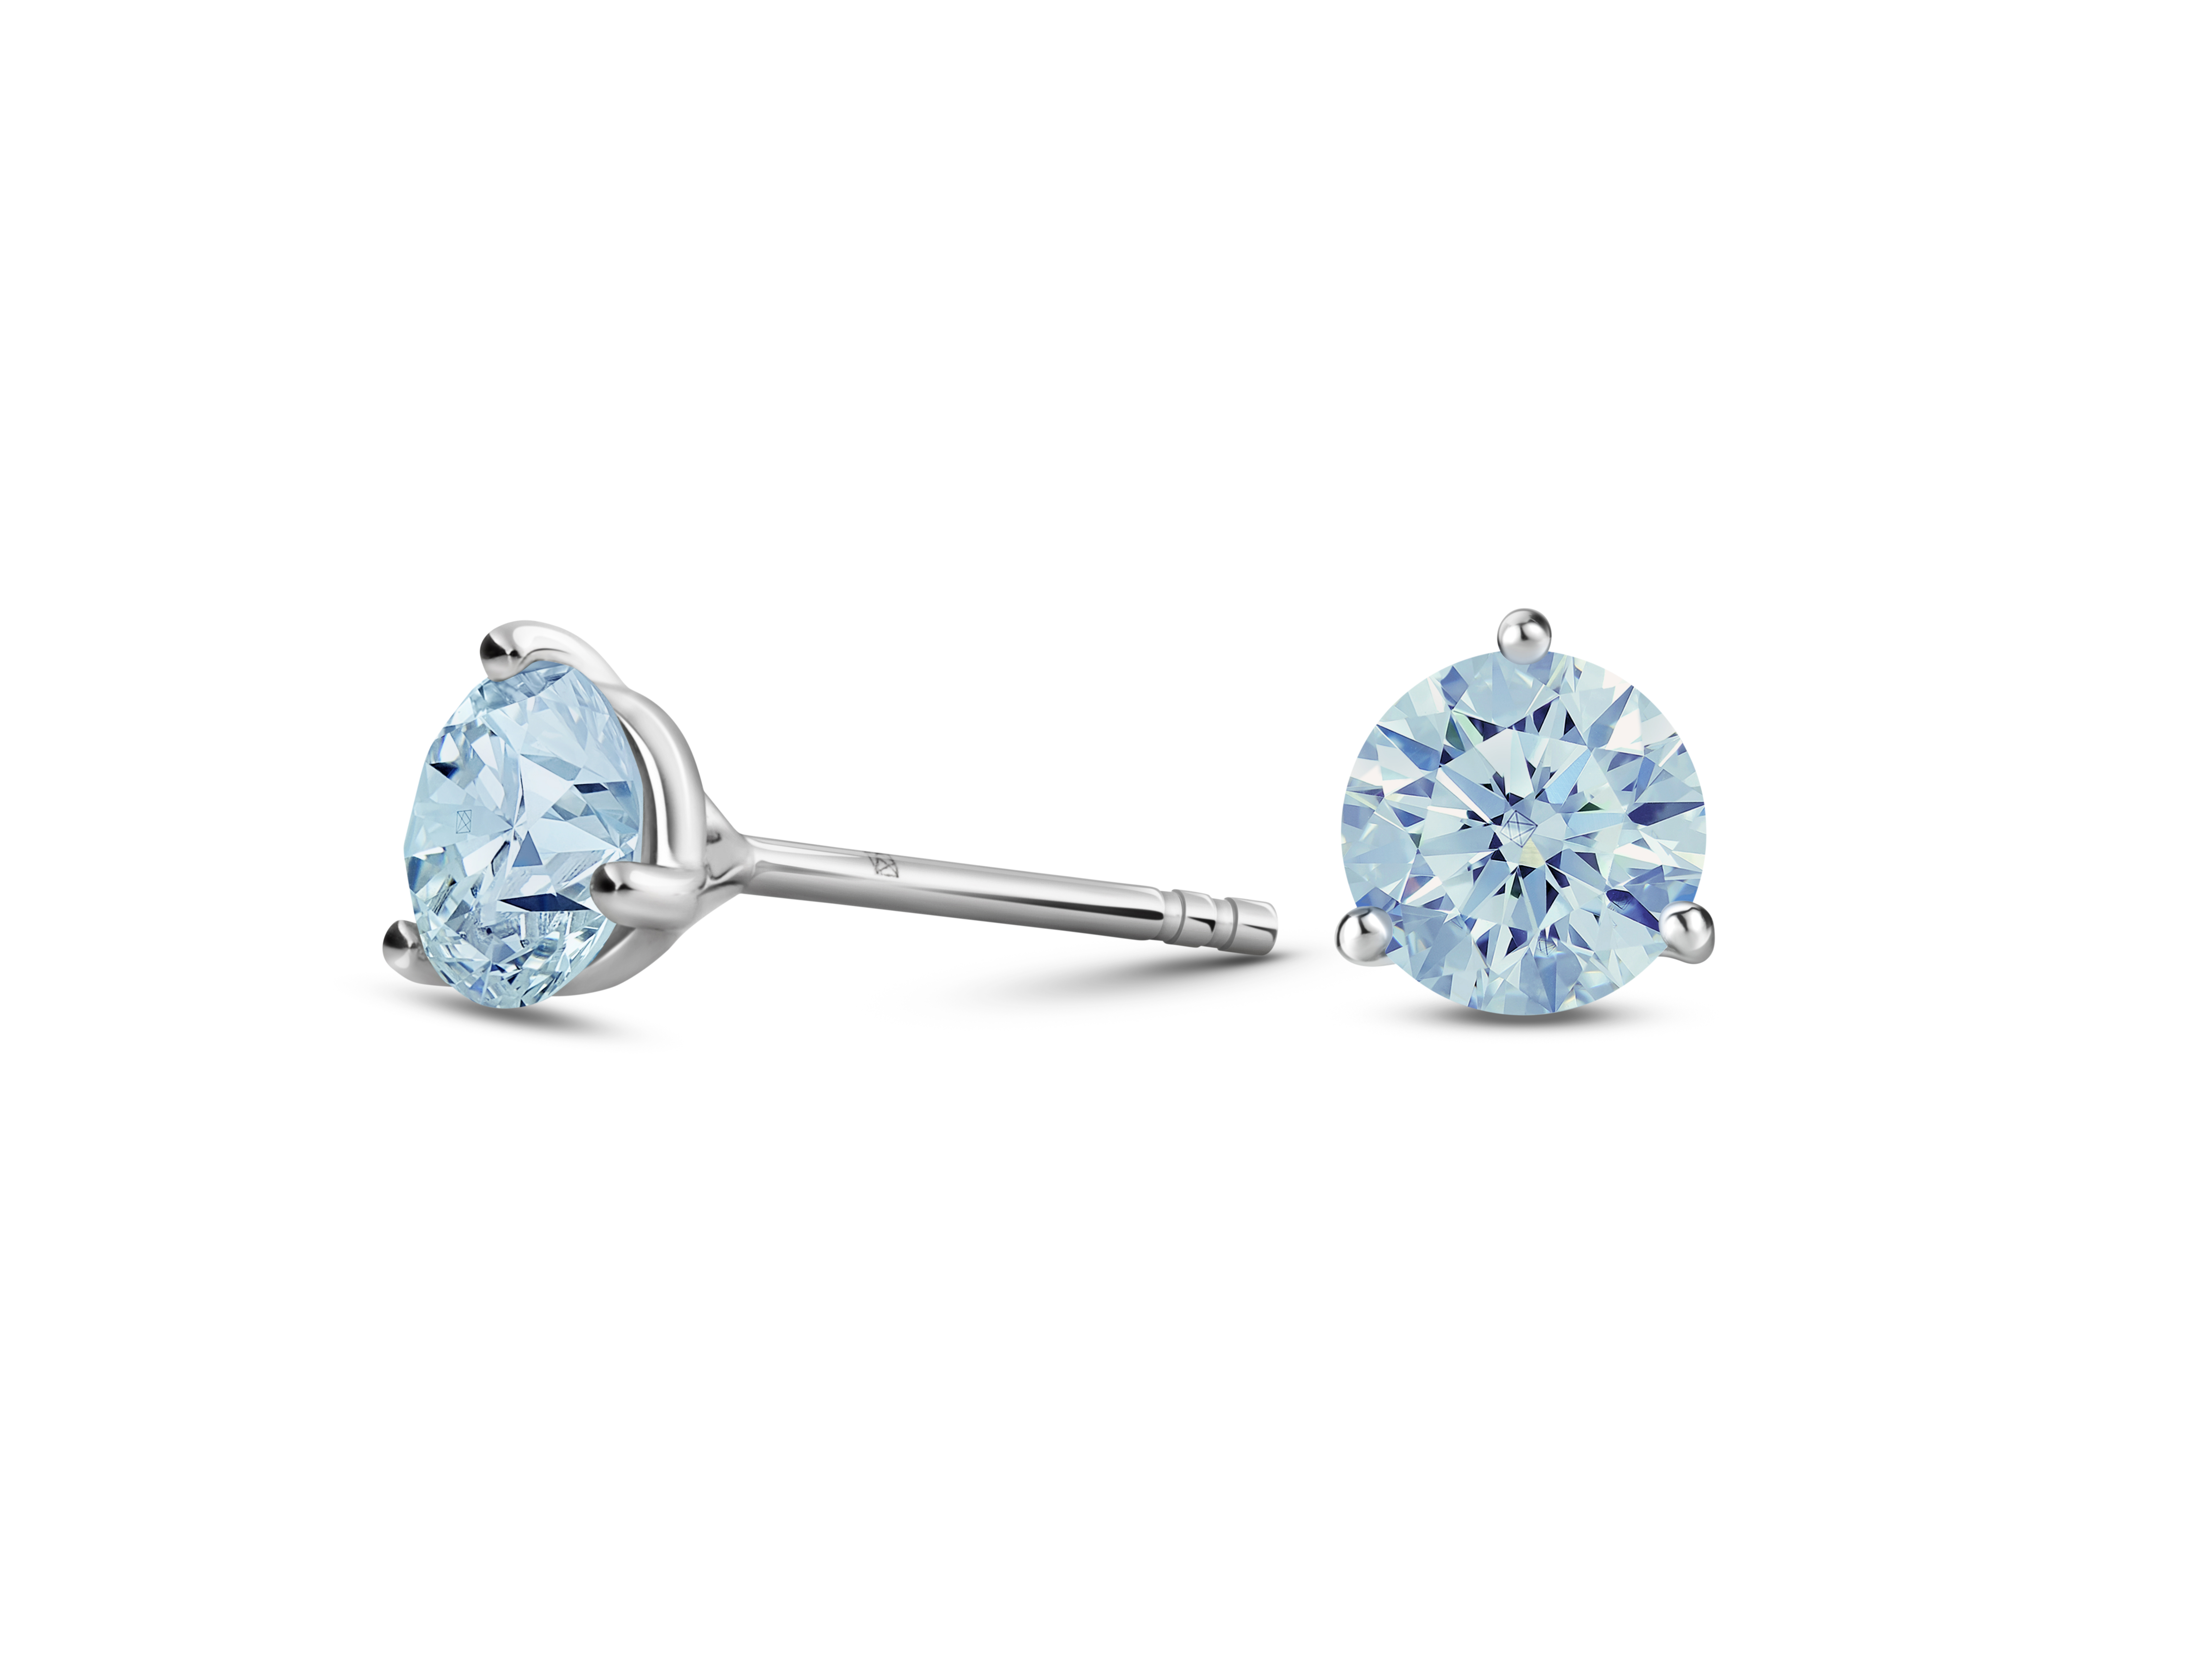 Side view of blue 1 carat solitaire studs in 14k white gold